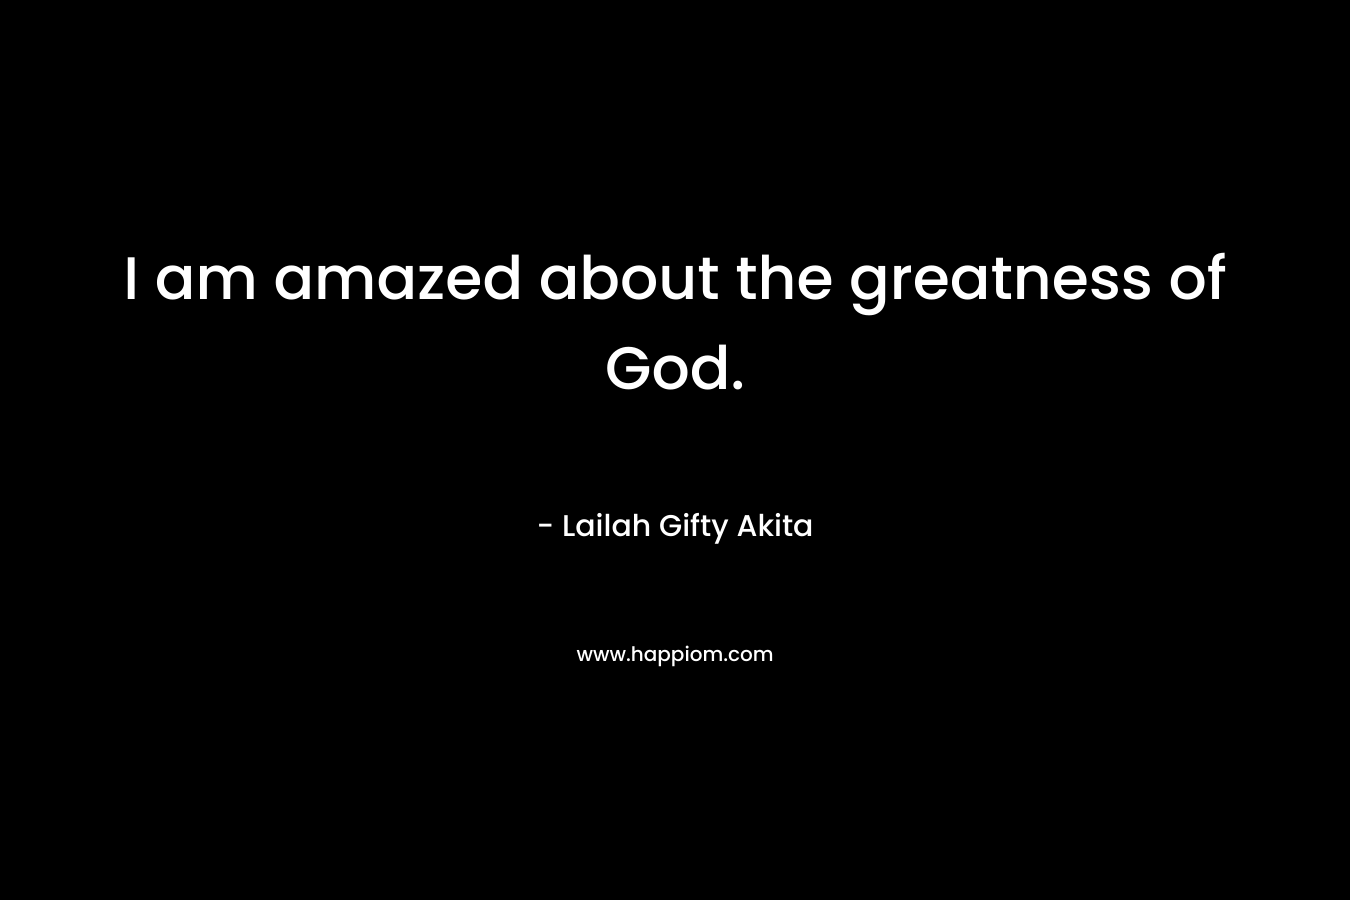 I am amazed about the greatness of God.